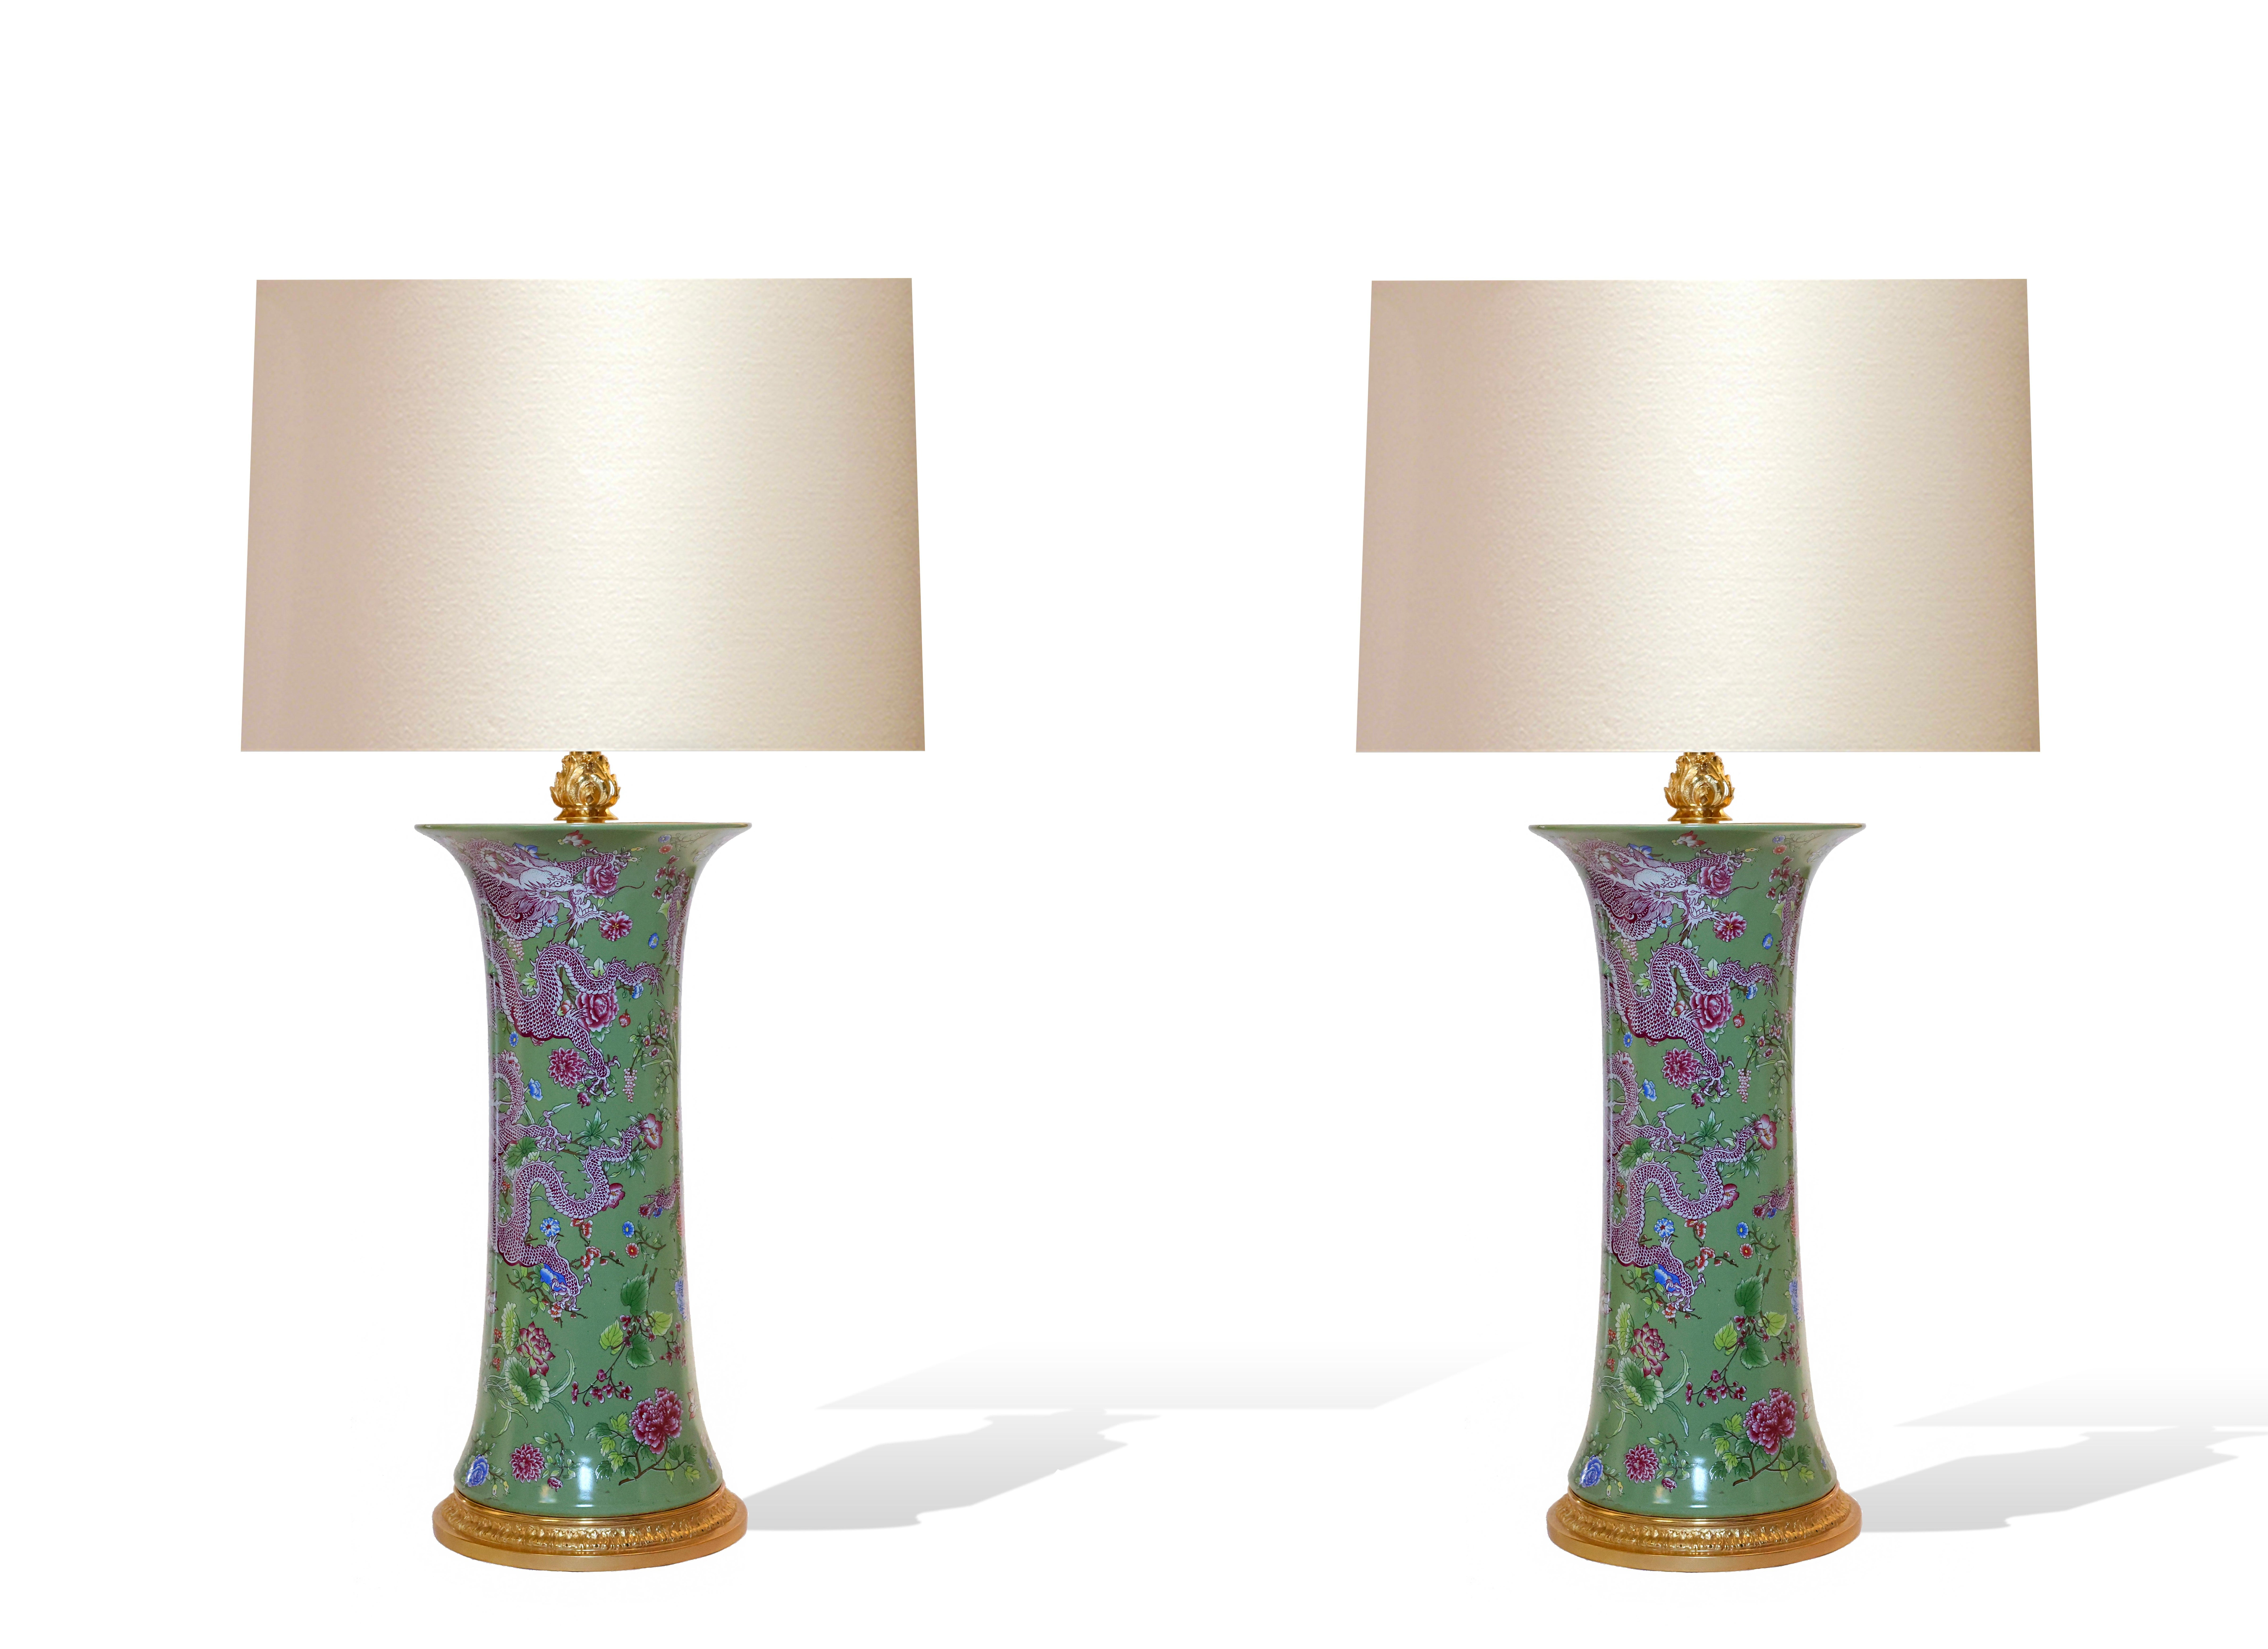 Pair of green glazed porcelain lamps with dragon decorations.
Each lamp installed two standard sockets To the top of the porcelain 17”in 
Lamp shade not included.